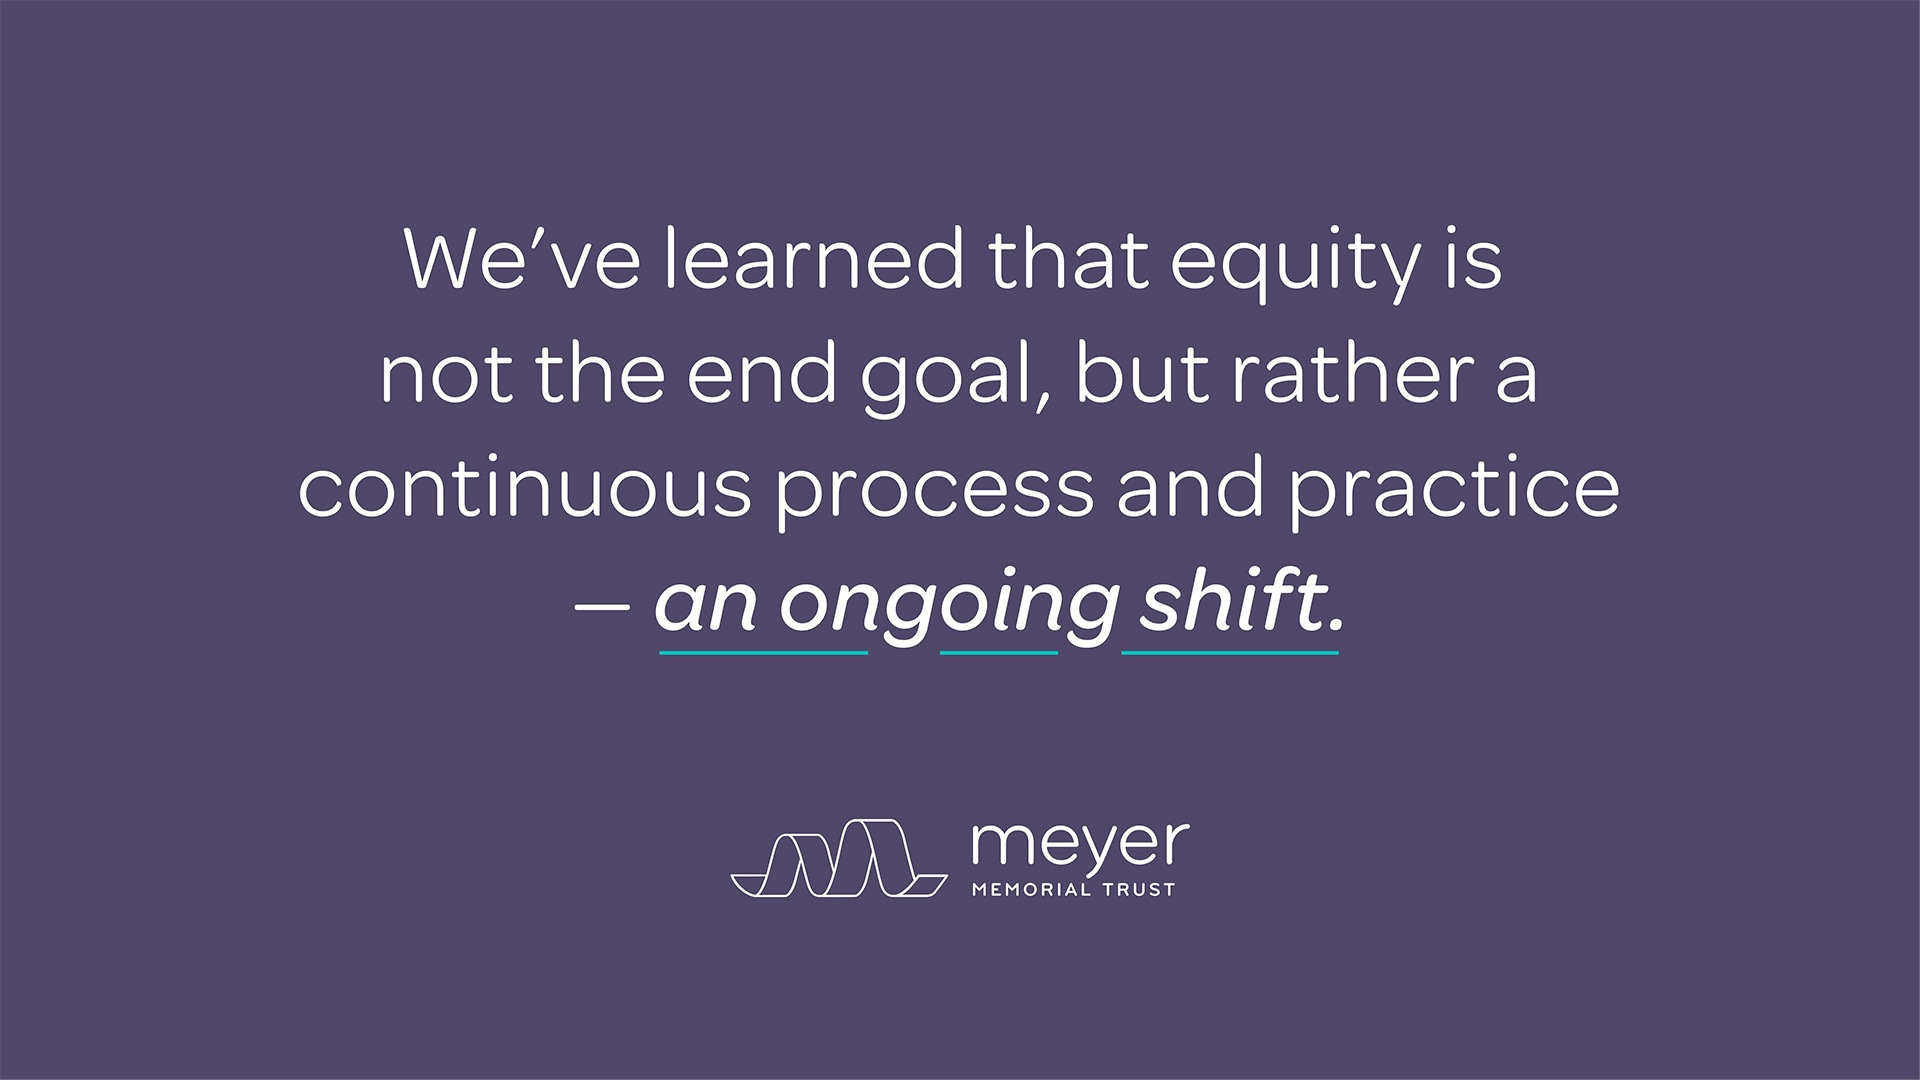 Quote from Meyer reading "we learned that equity is not just the end goal, but a continuous practice — an ongoing shift"